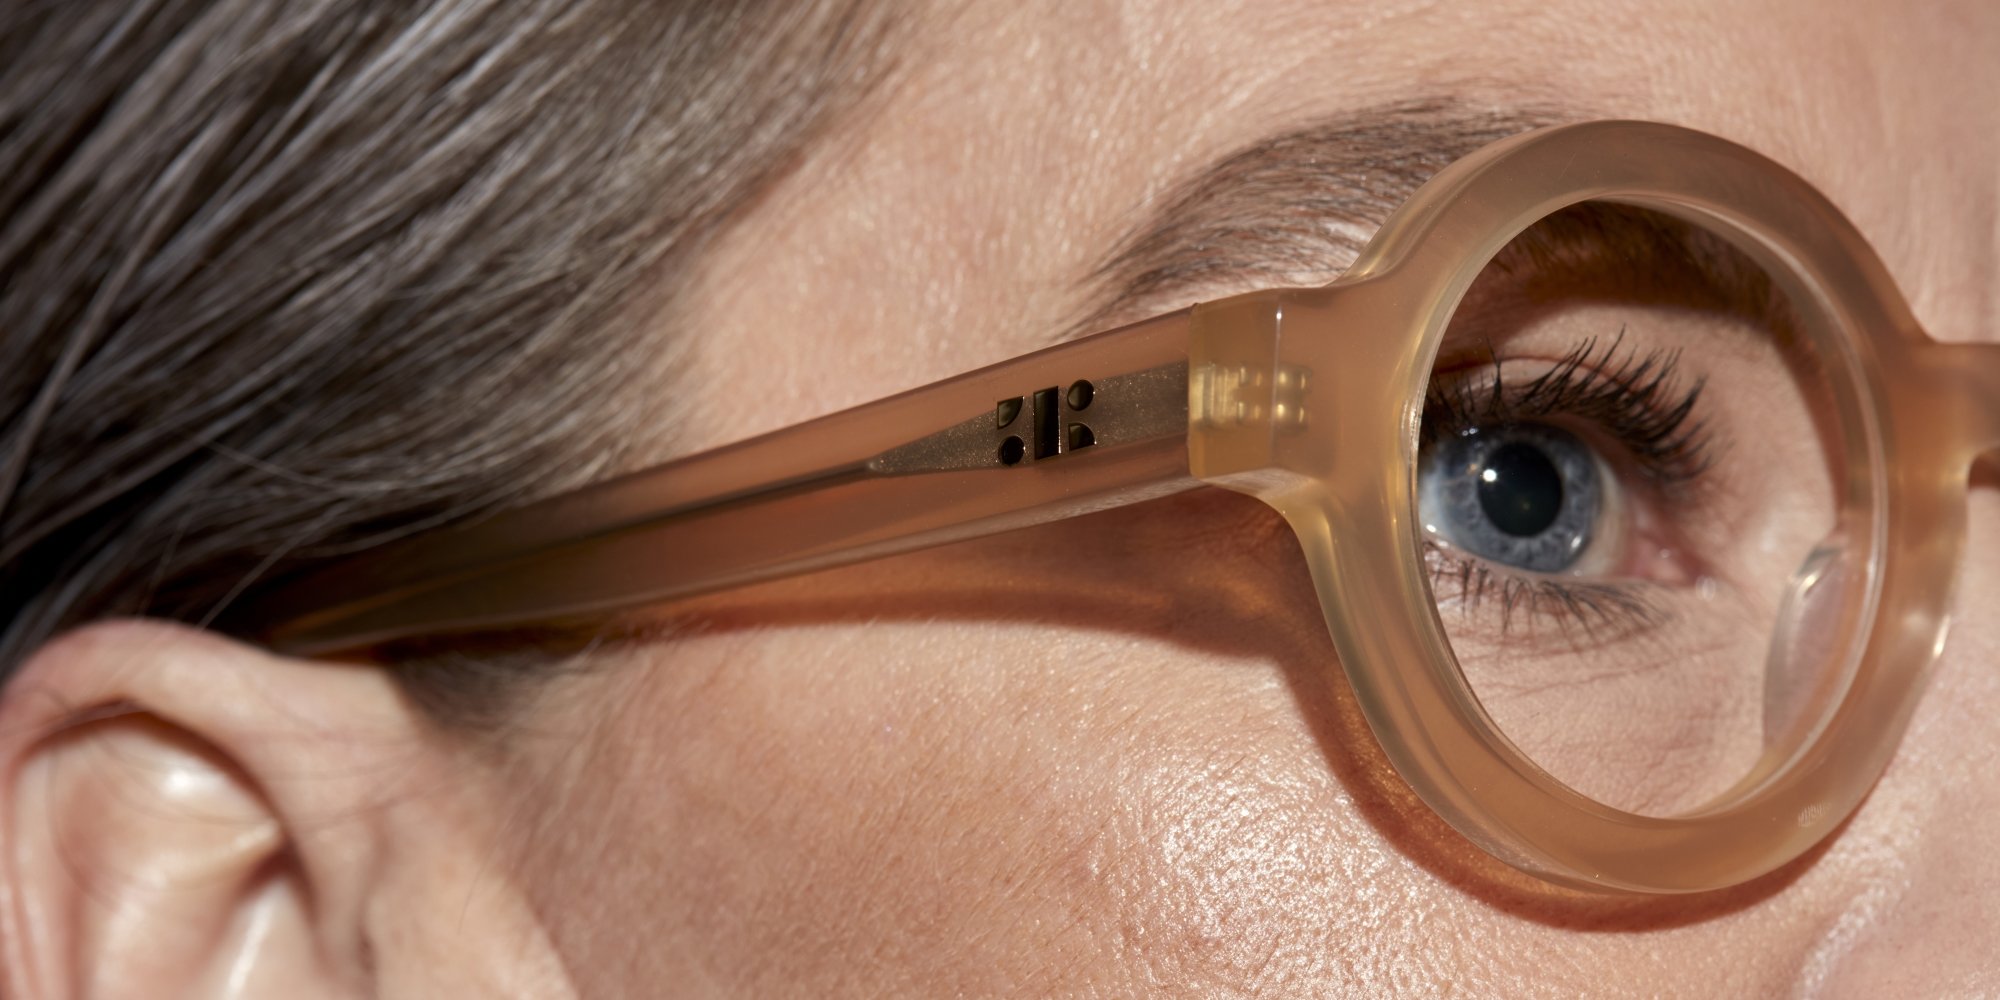 Photo Details of Lola Cherry Reading Glasses in a room